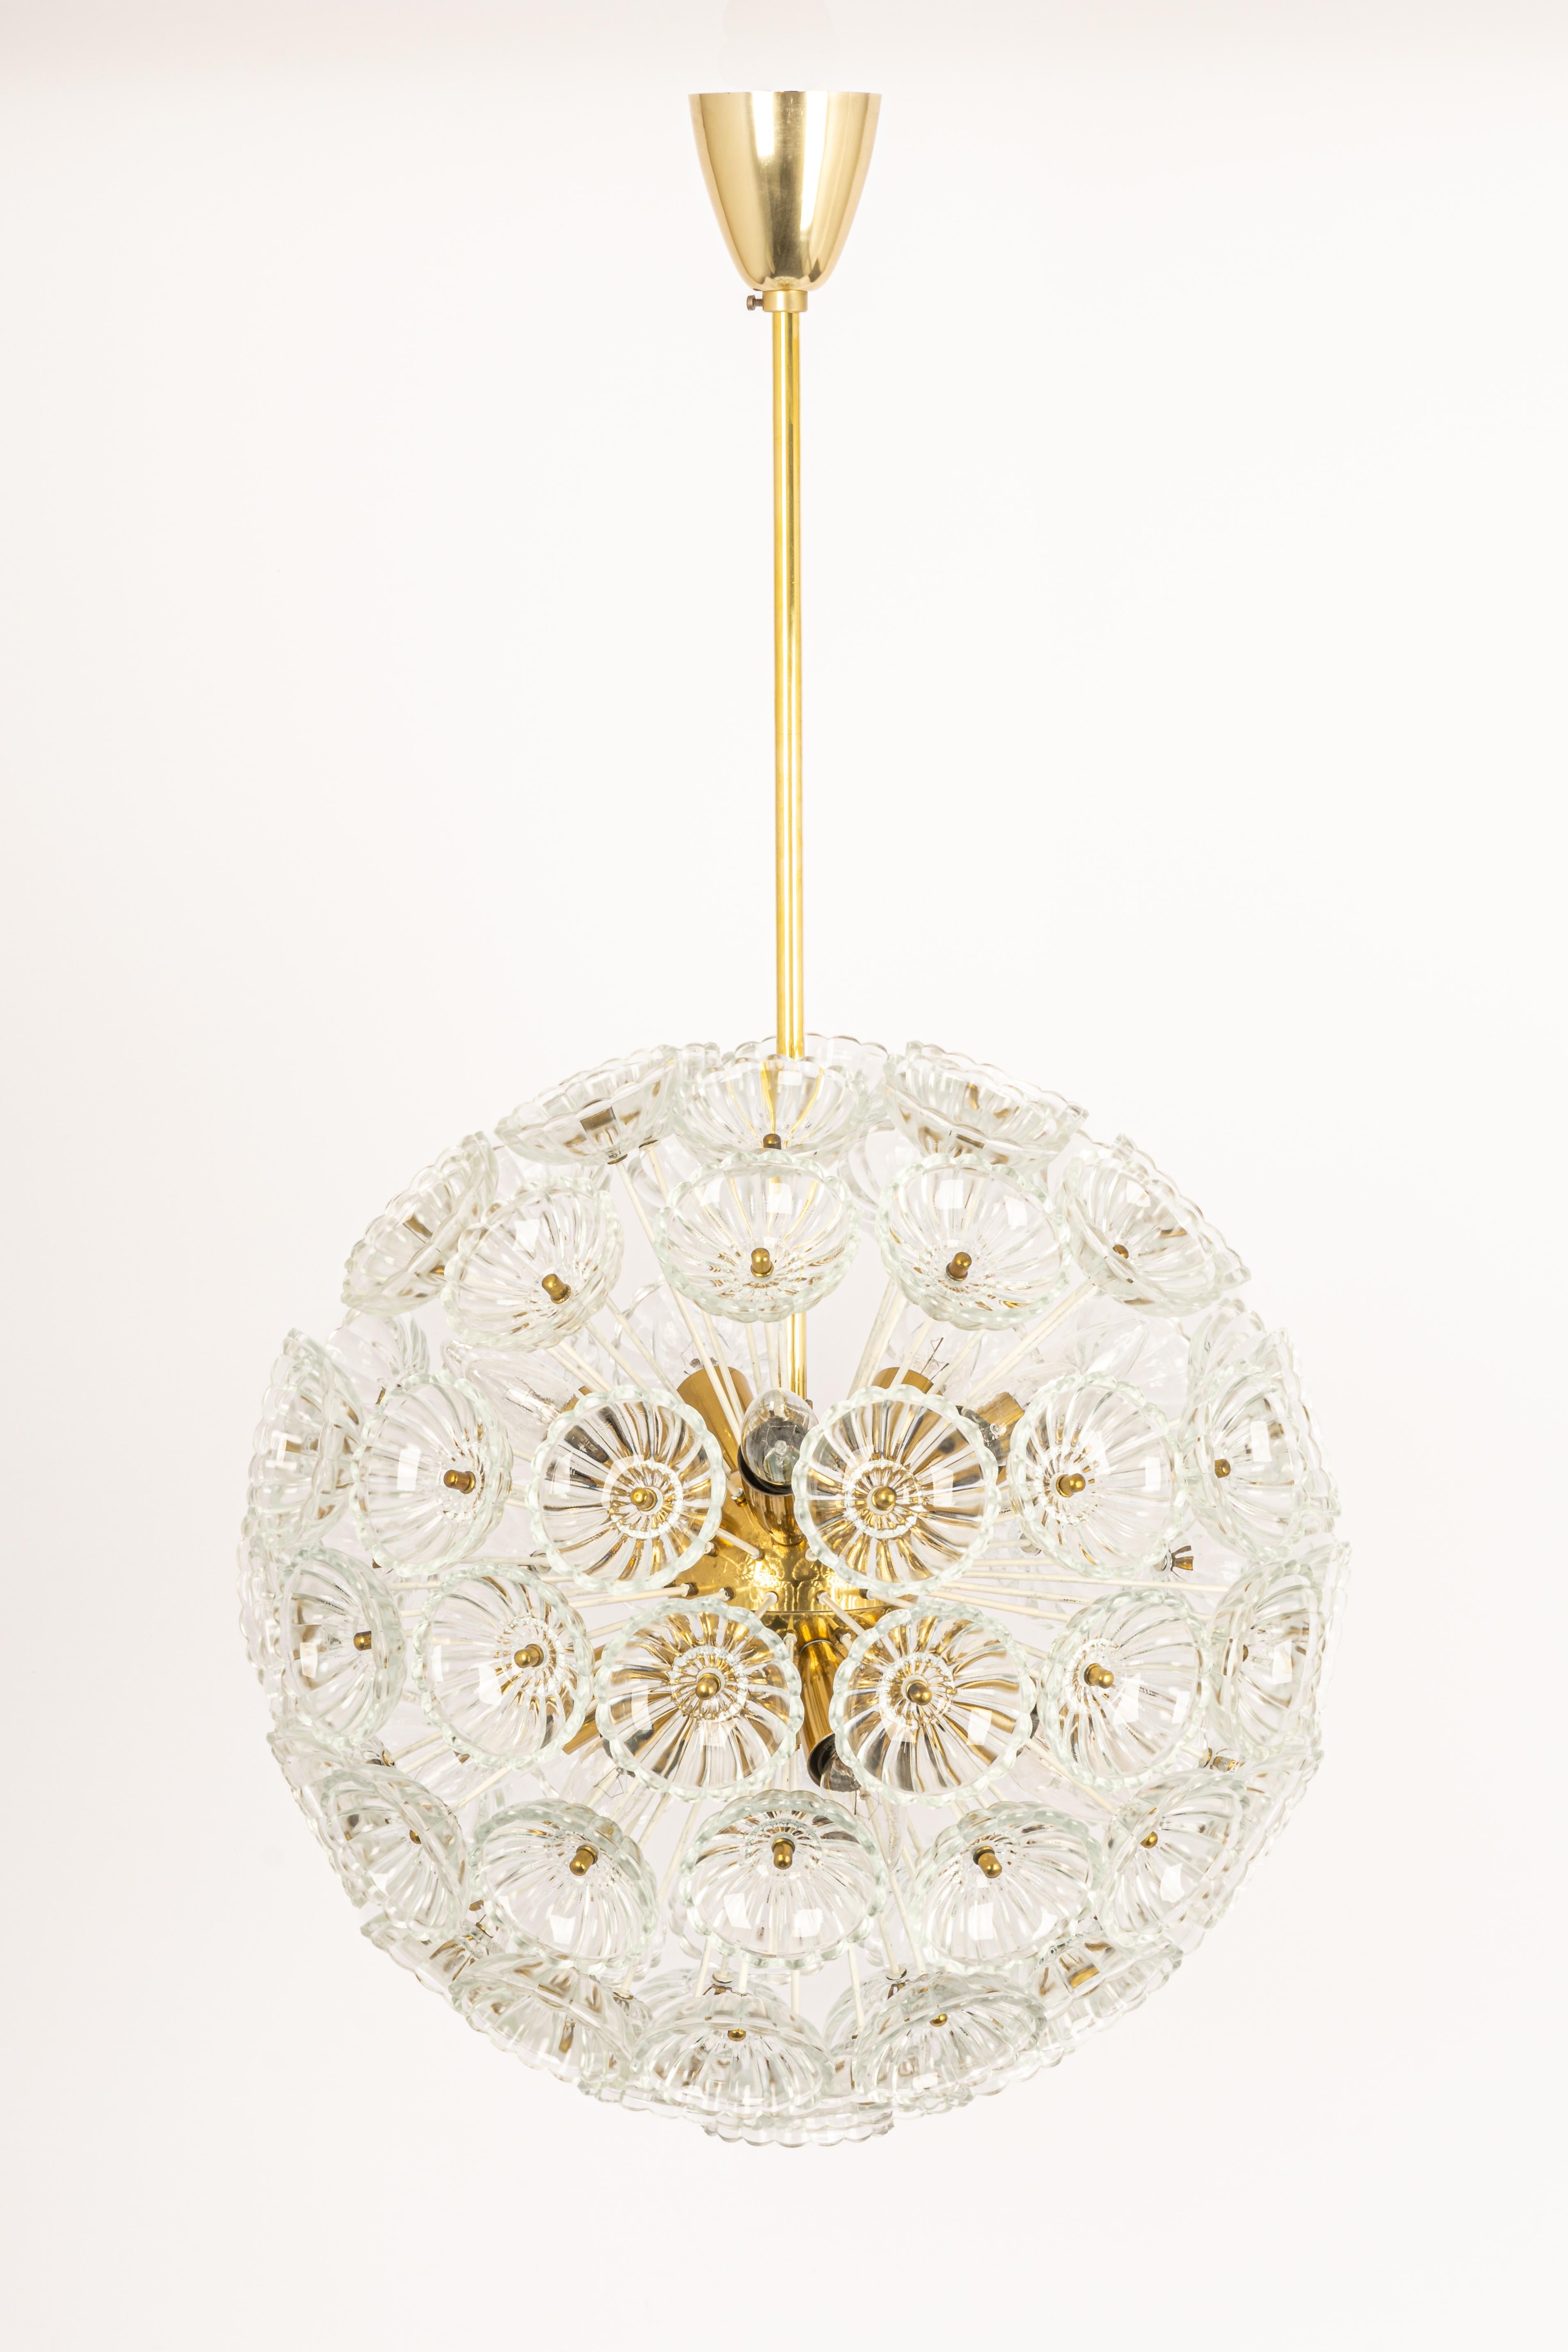 Stunning floral glass and brass Sputnik chandeliers, Germany, 1960s.

It requires 14 x E14 small bulbs with 40W max each.
Light bulbs are not included. It is possible to install this fixture in all countries (US, UK, Europe, Asia,